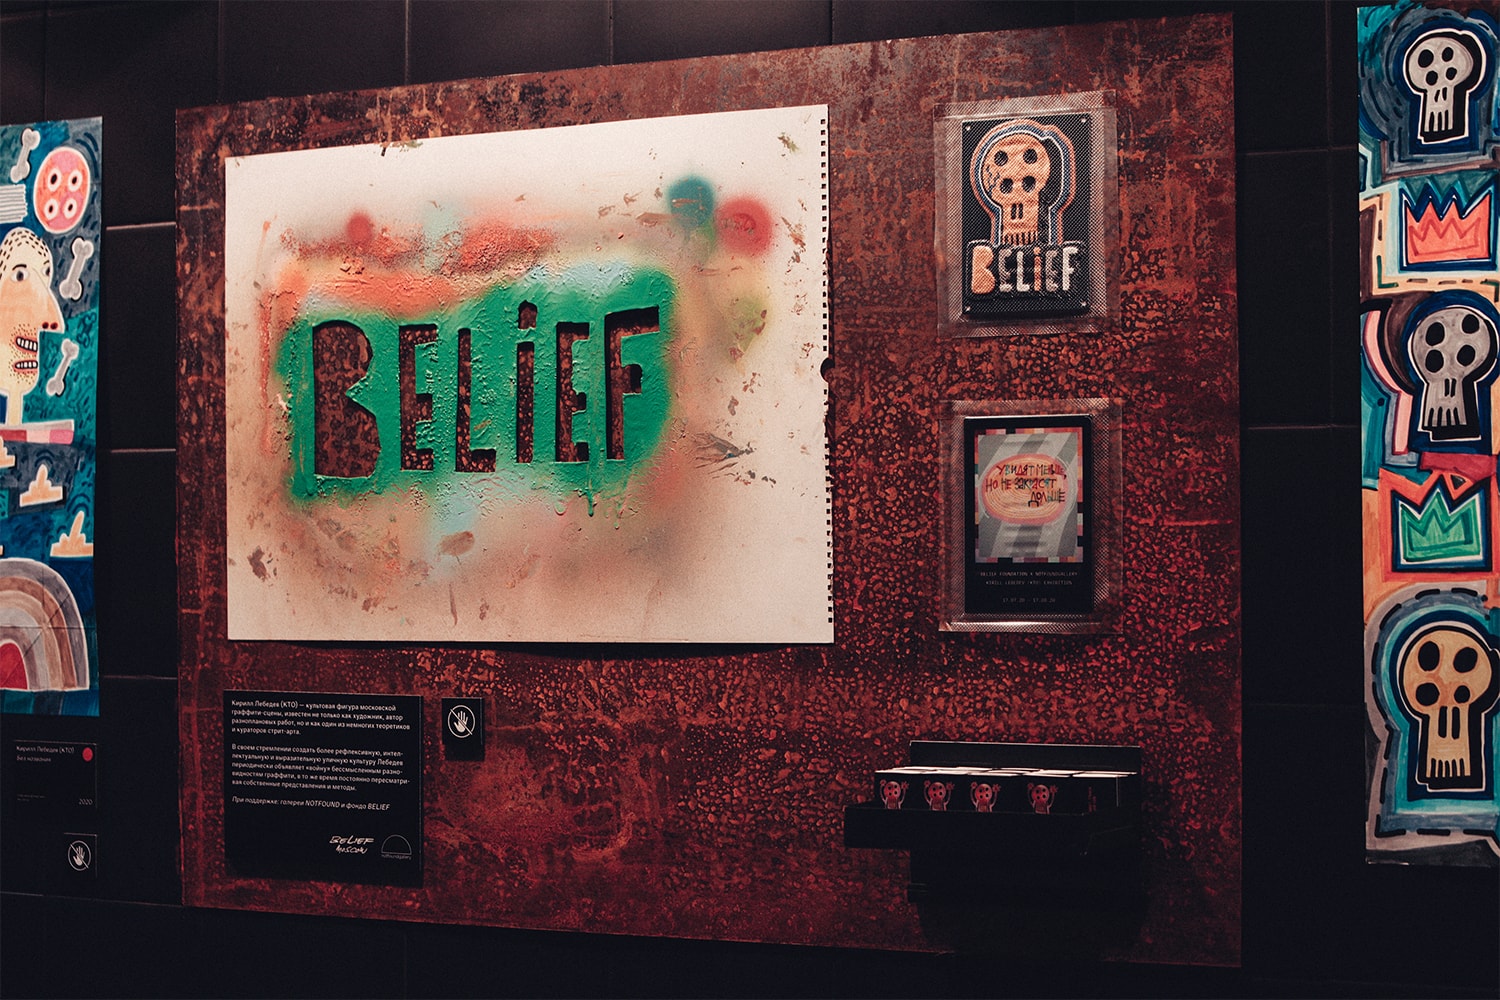 BELIEF Moscow Kirill Lebedev Exhibition Pop-Up Store Info Location Address Russia Streetwear NOTFOUND